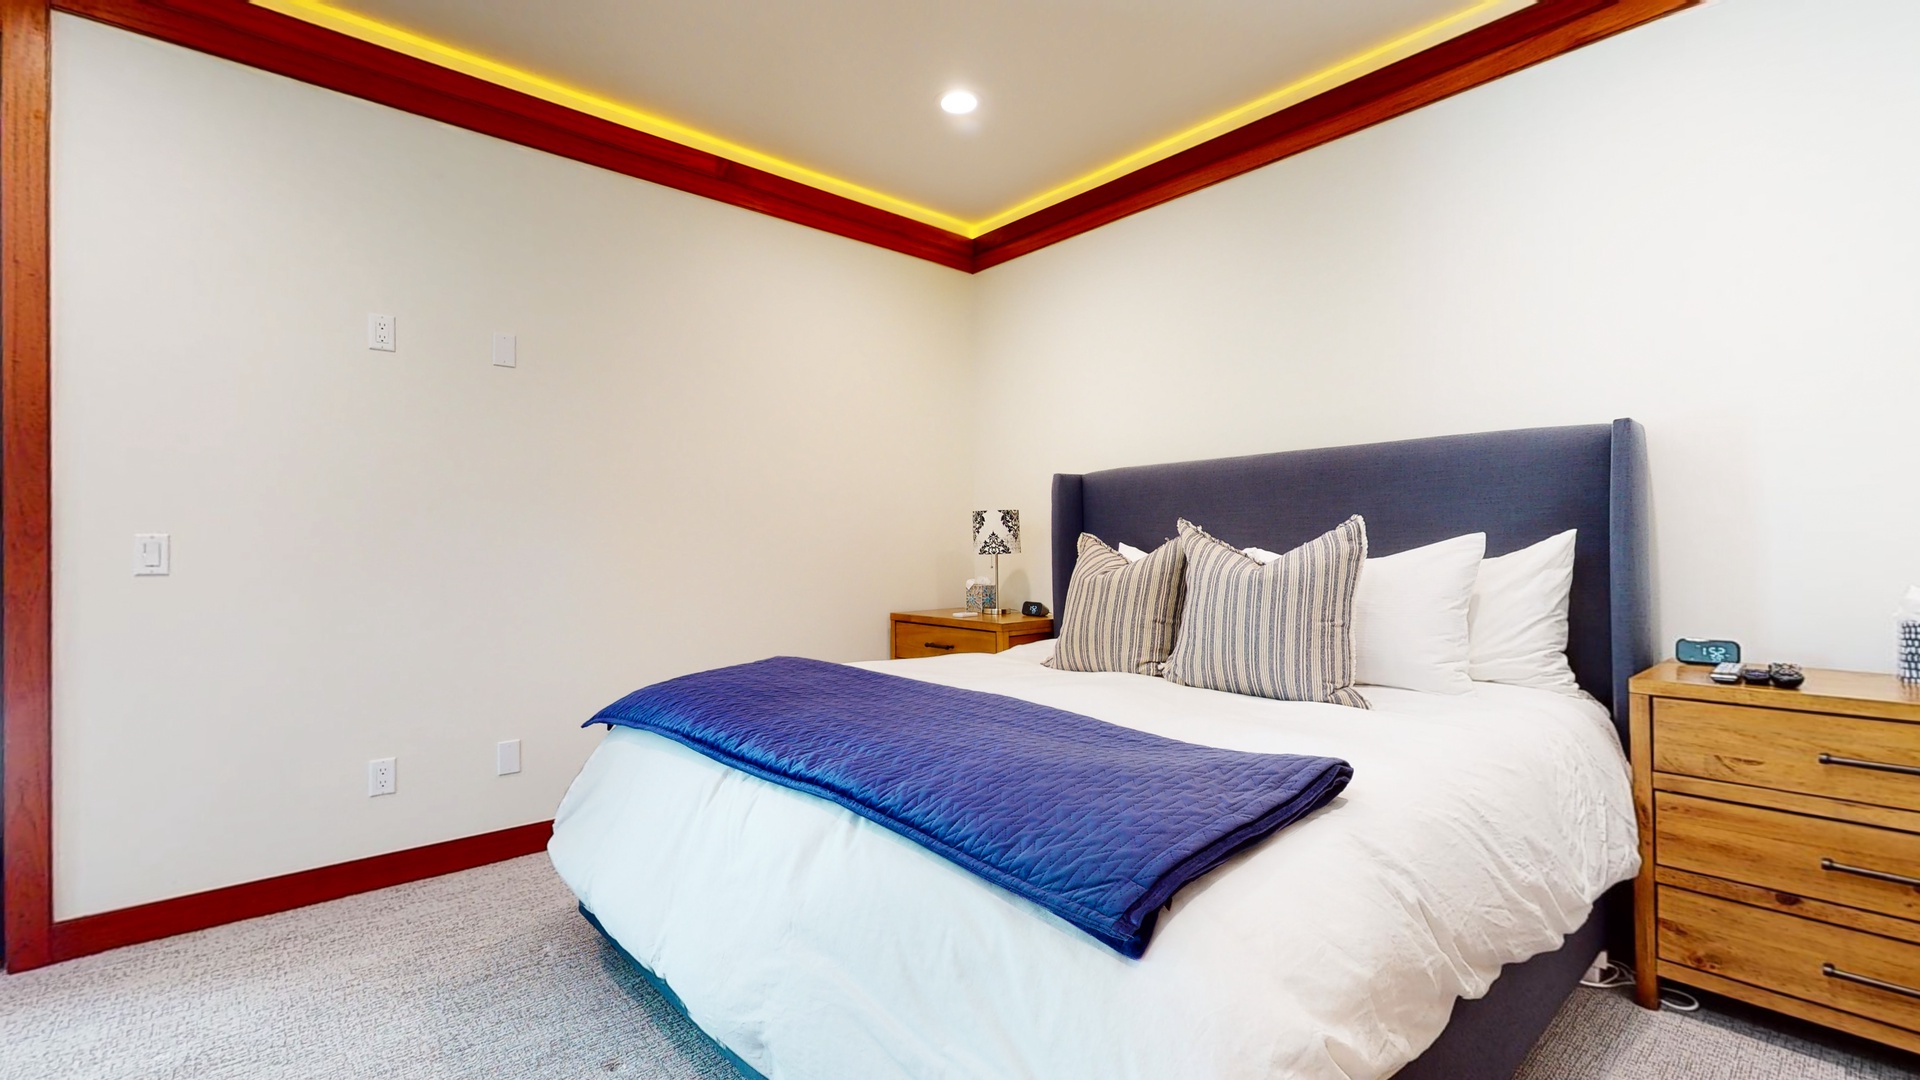 The 3rd floor king suite offers private balcony access, Smart TV, and en suite